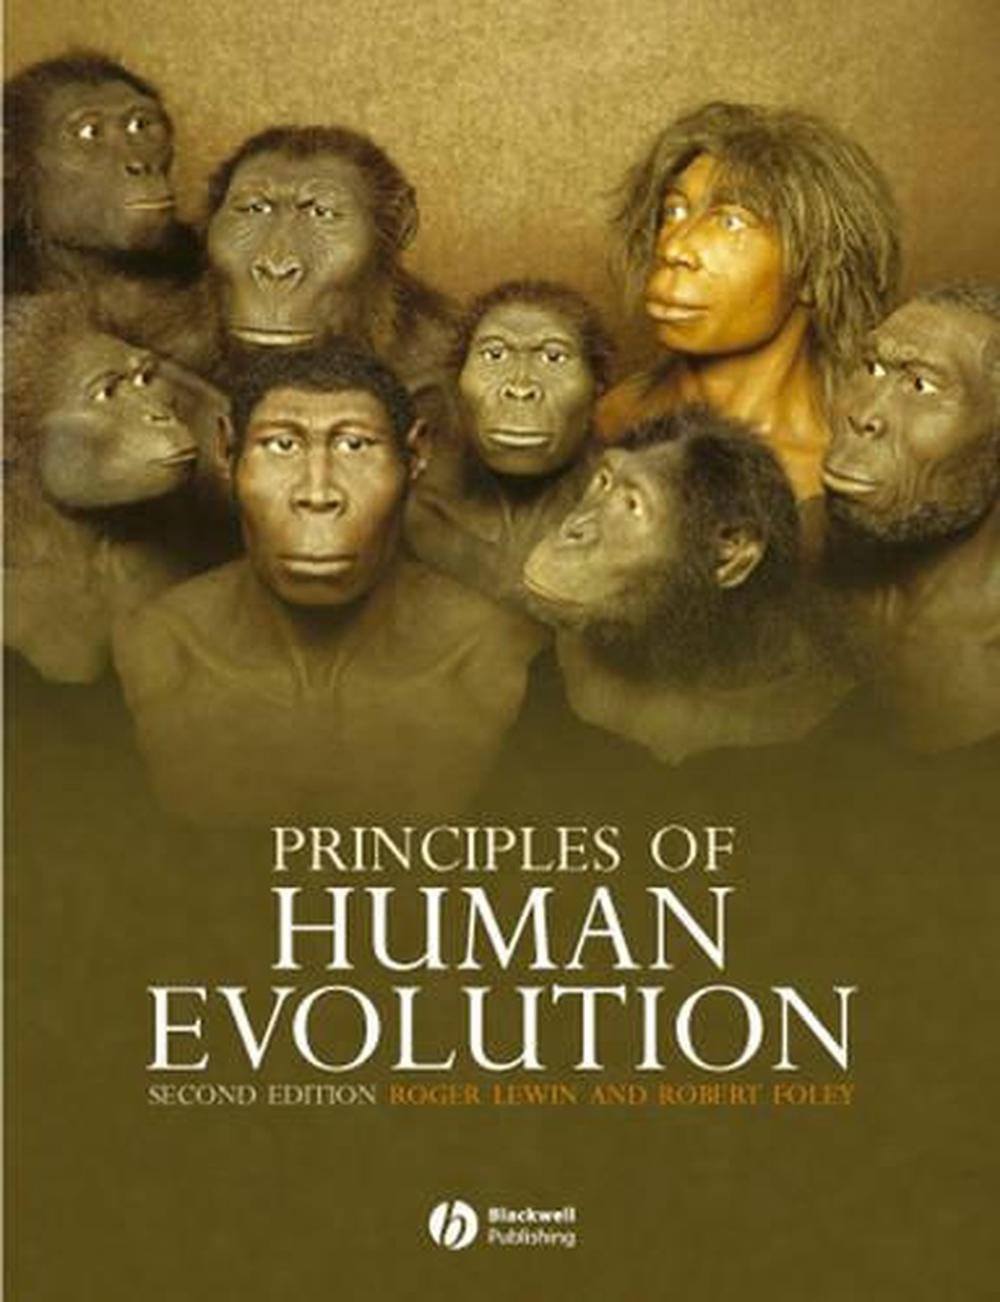 Principles of Human Evolution by Roger Lewin (English) Paperback Book